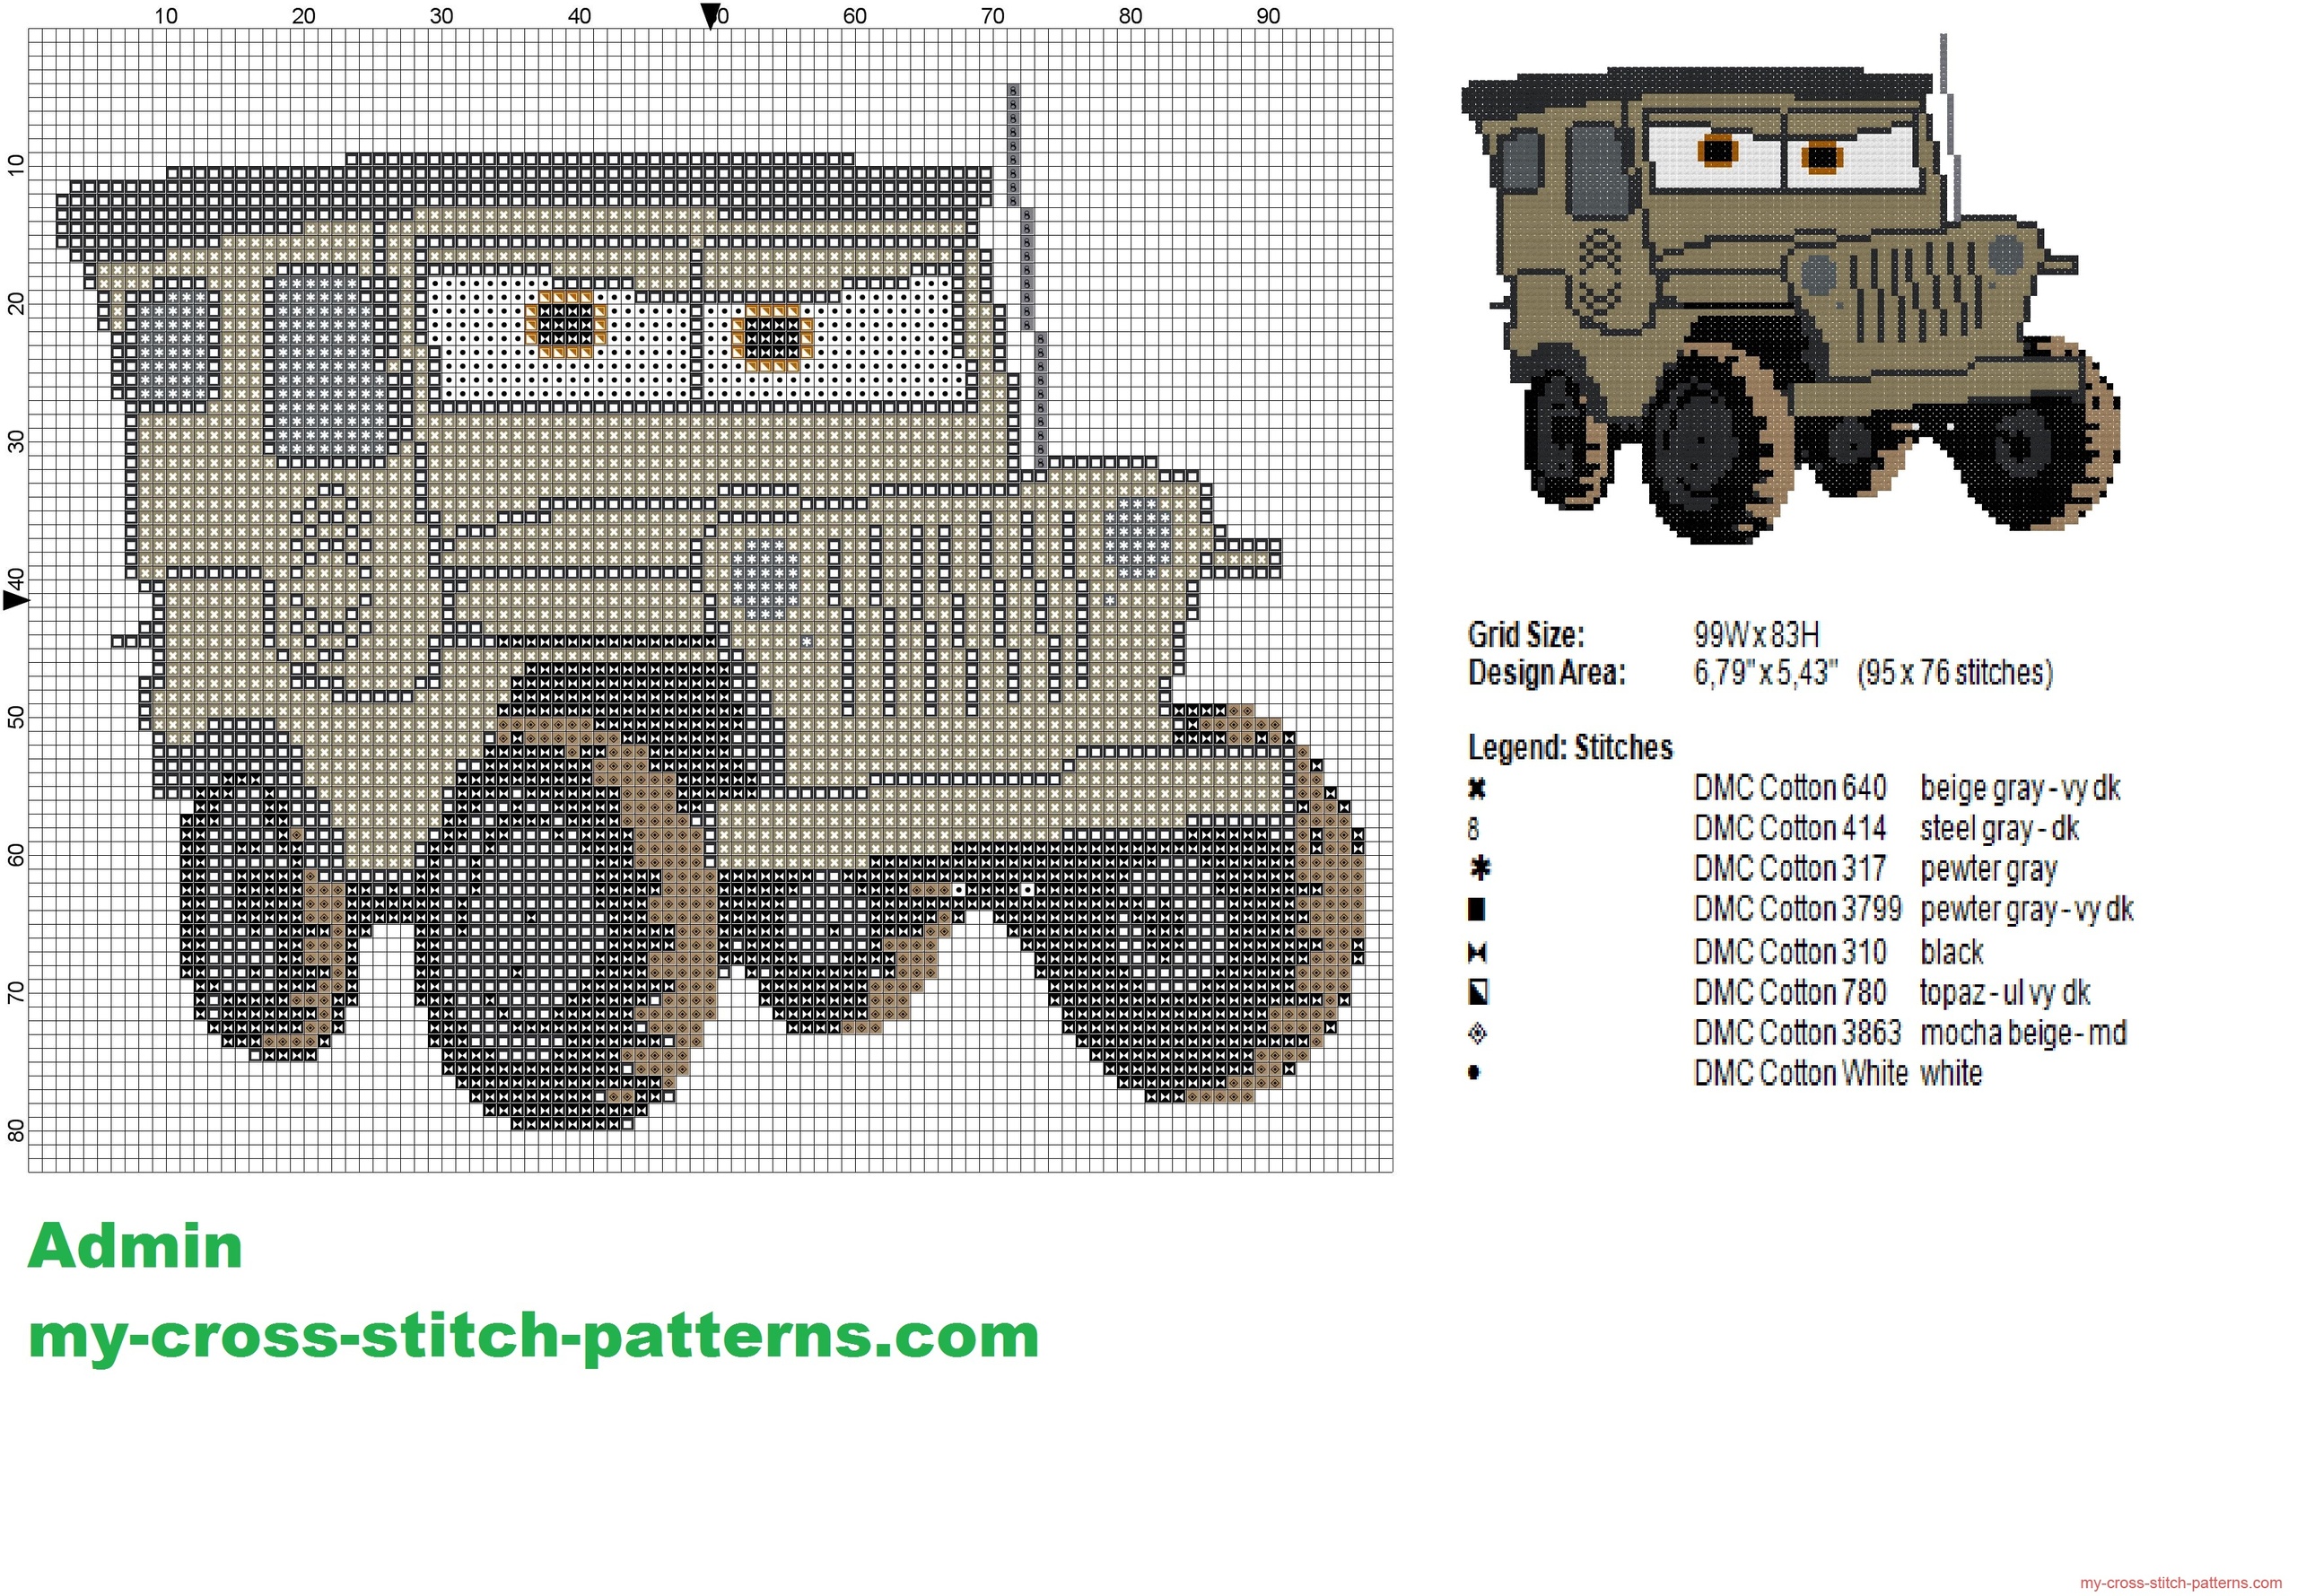 sarge_a_character_from_disney_cars_cross_stitch_pattern